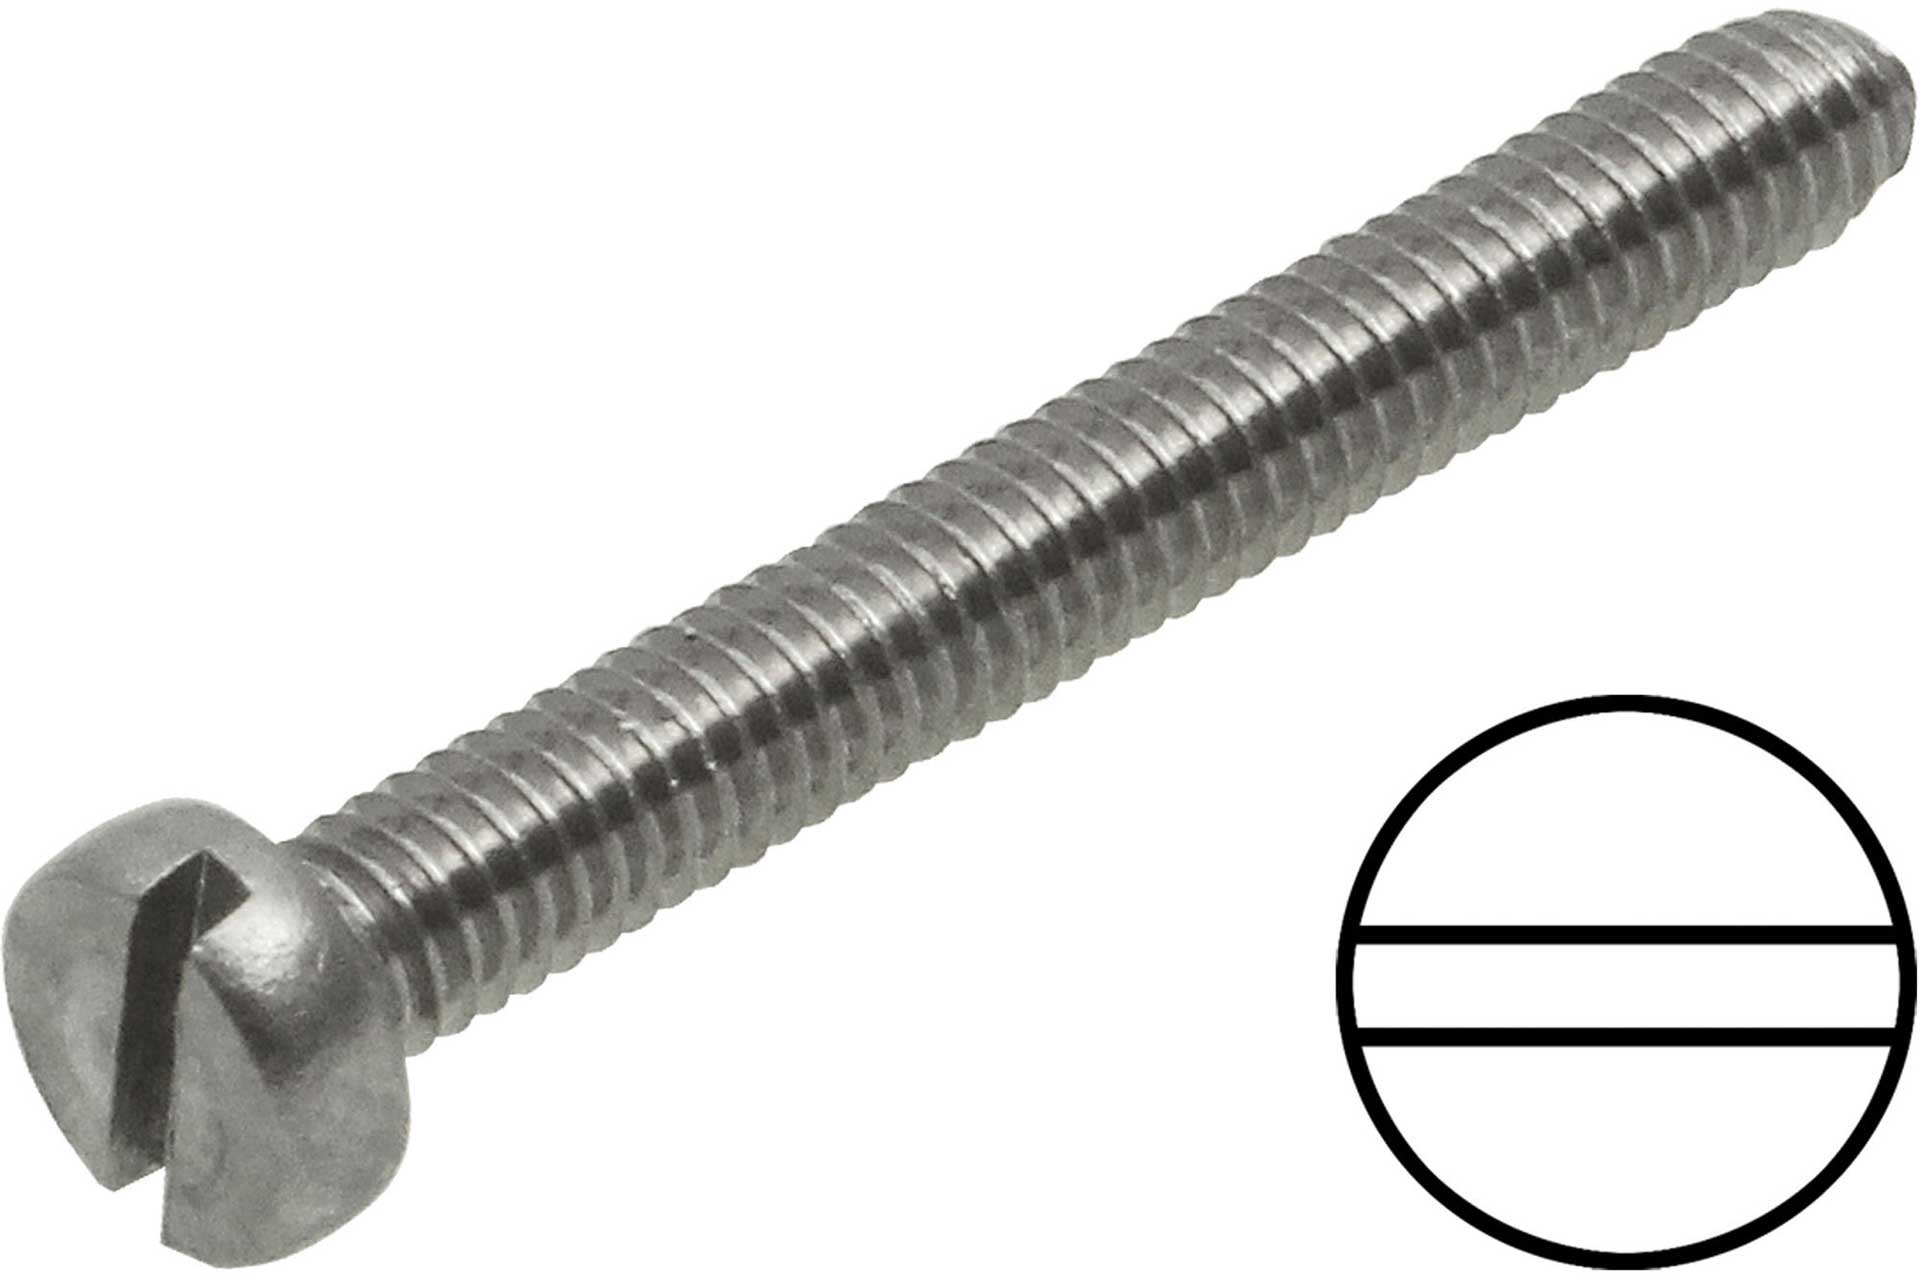 Modellbau Lindinger CHEESE-HEAD BOLTS M2.5/20MM STAINLESS STEEL, 10PCS.